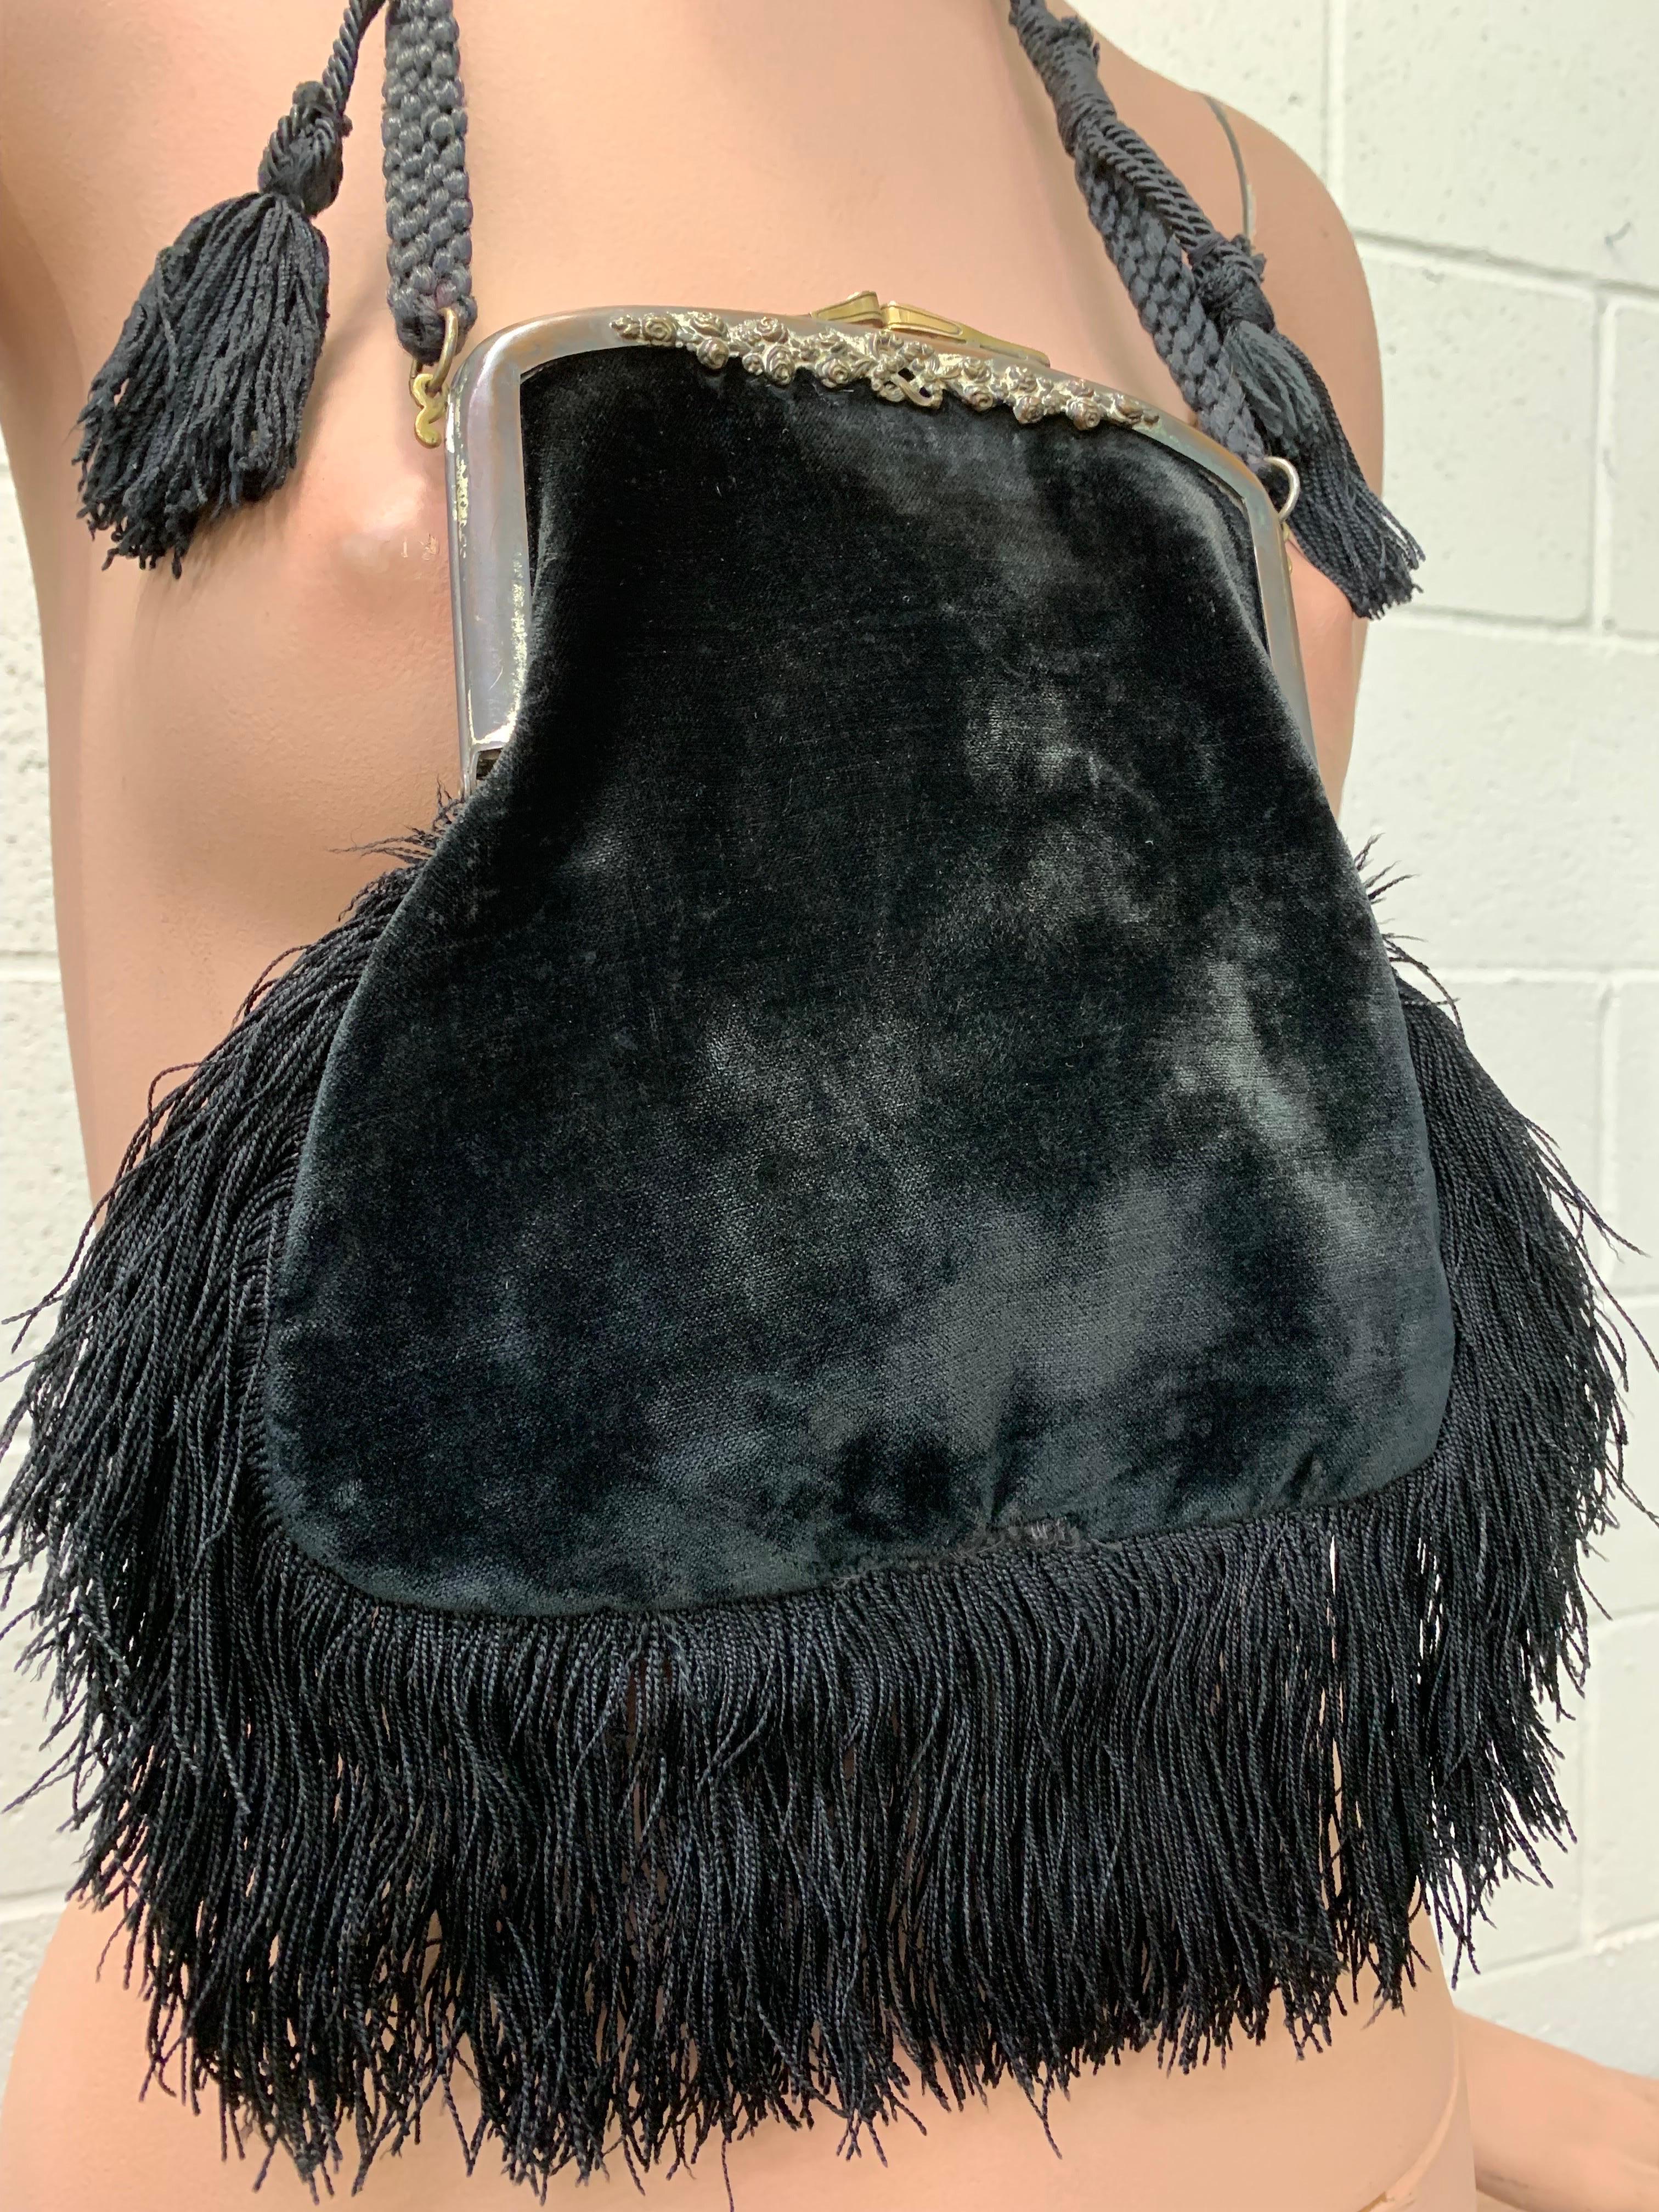 Art Nouveau Black Silk Velvet & Fringed Handbag w Braid Strap & Tassels: Kiss-clasp antique metal frame. A goth dream that fits a cellphone and more!  Indigo lining with pouch pocket. Braided silk cord shoulderstrap and tassels. Heavily fringed at